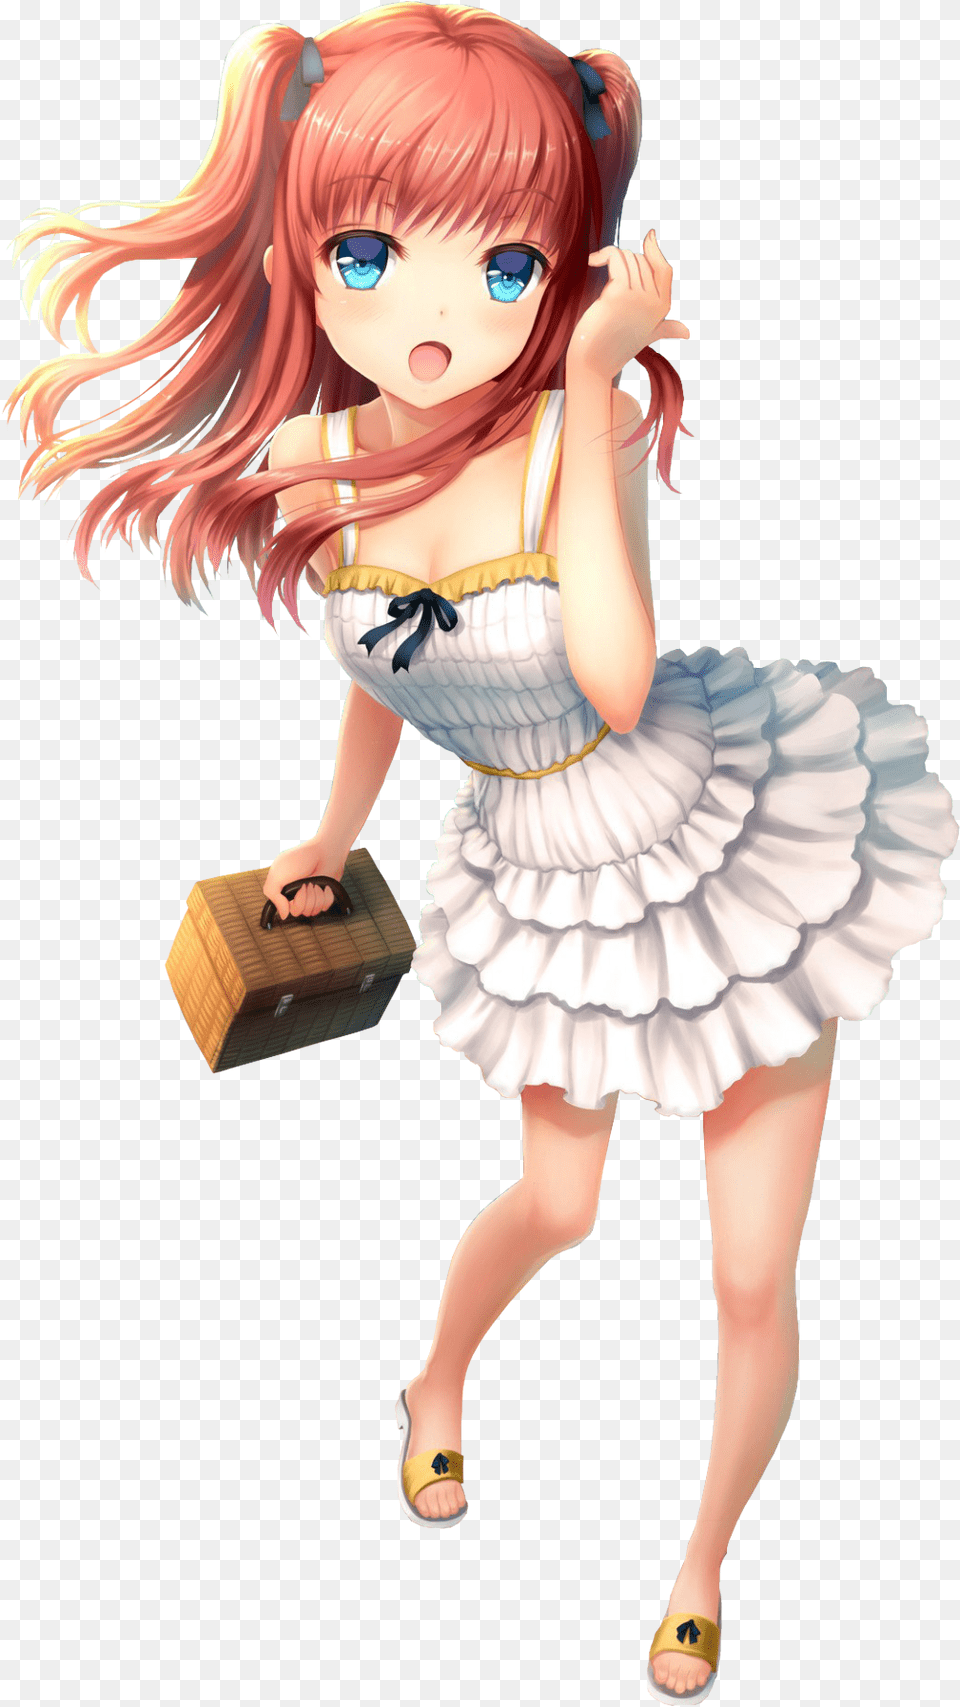 Transparent 2d Girl Kawaii Cute Girls Anime Anime Anime Girls In Sandals, Doll, Toy, Book, Publication Png